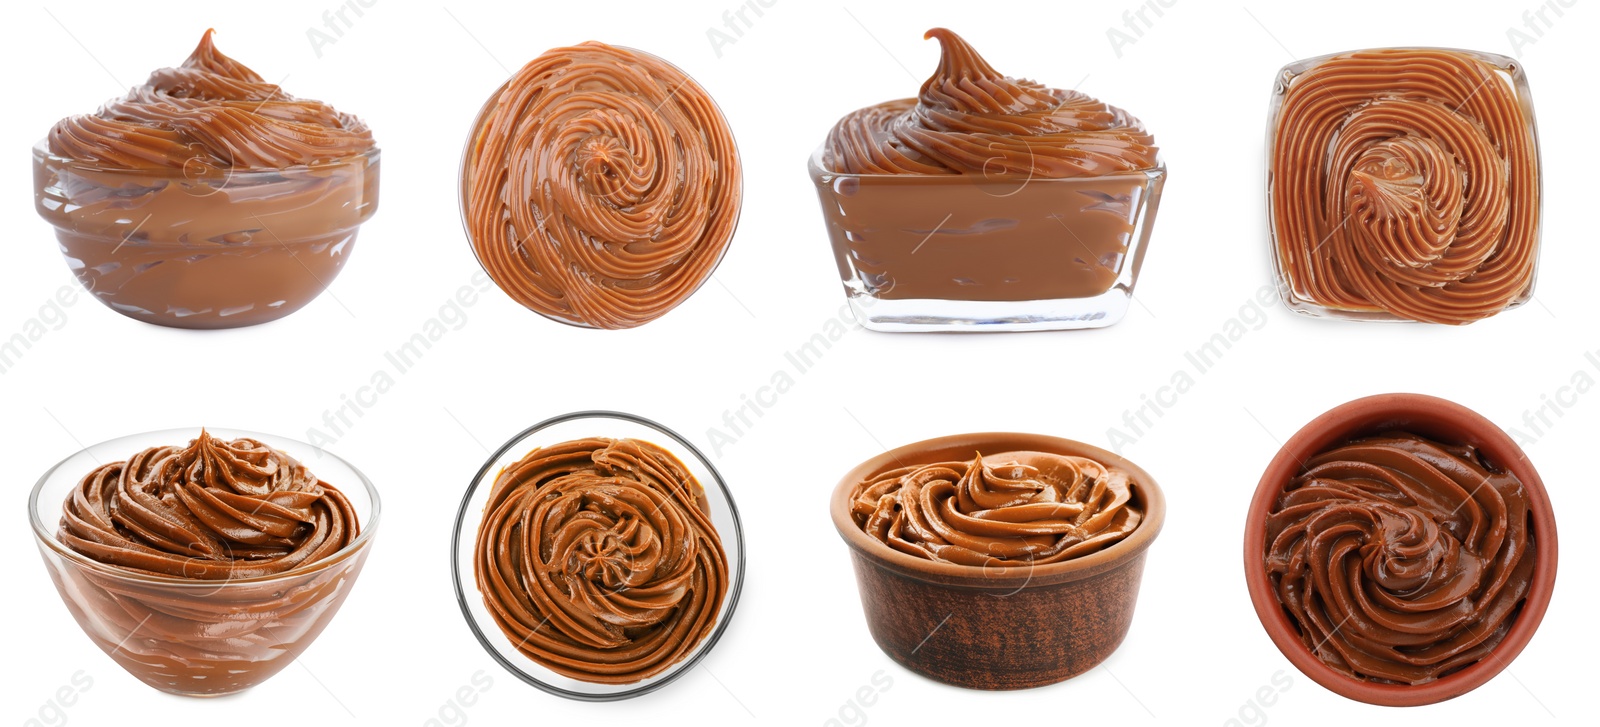 Image of Collage with boiled condensed milk in bowls on white background, top and side views